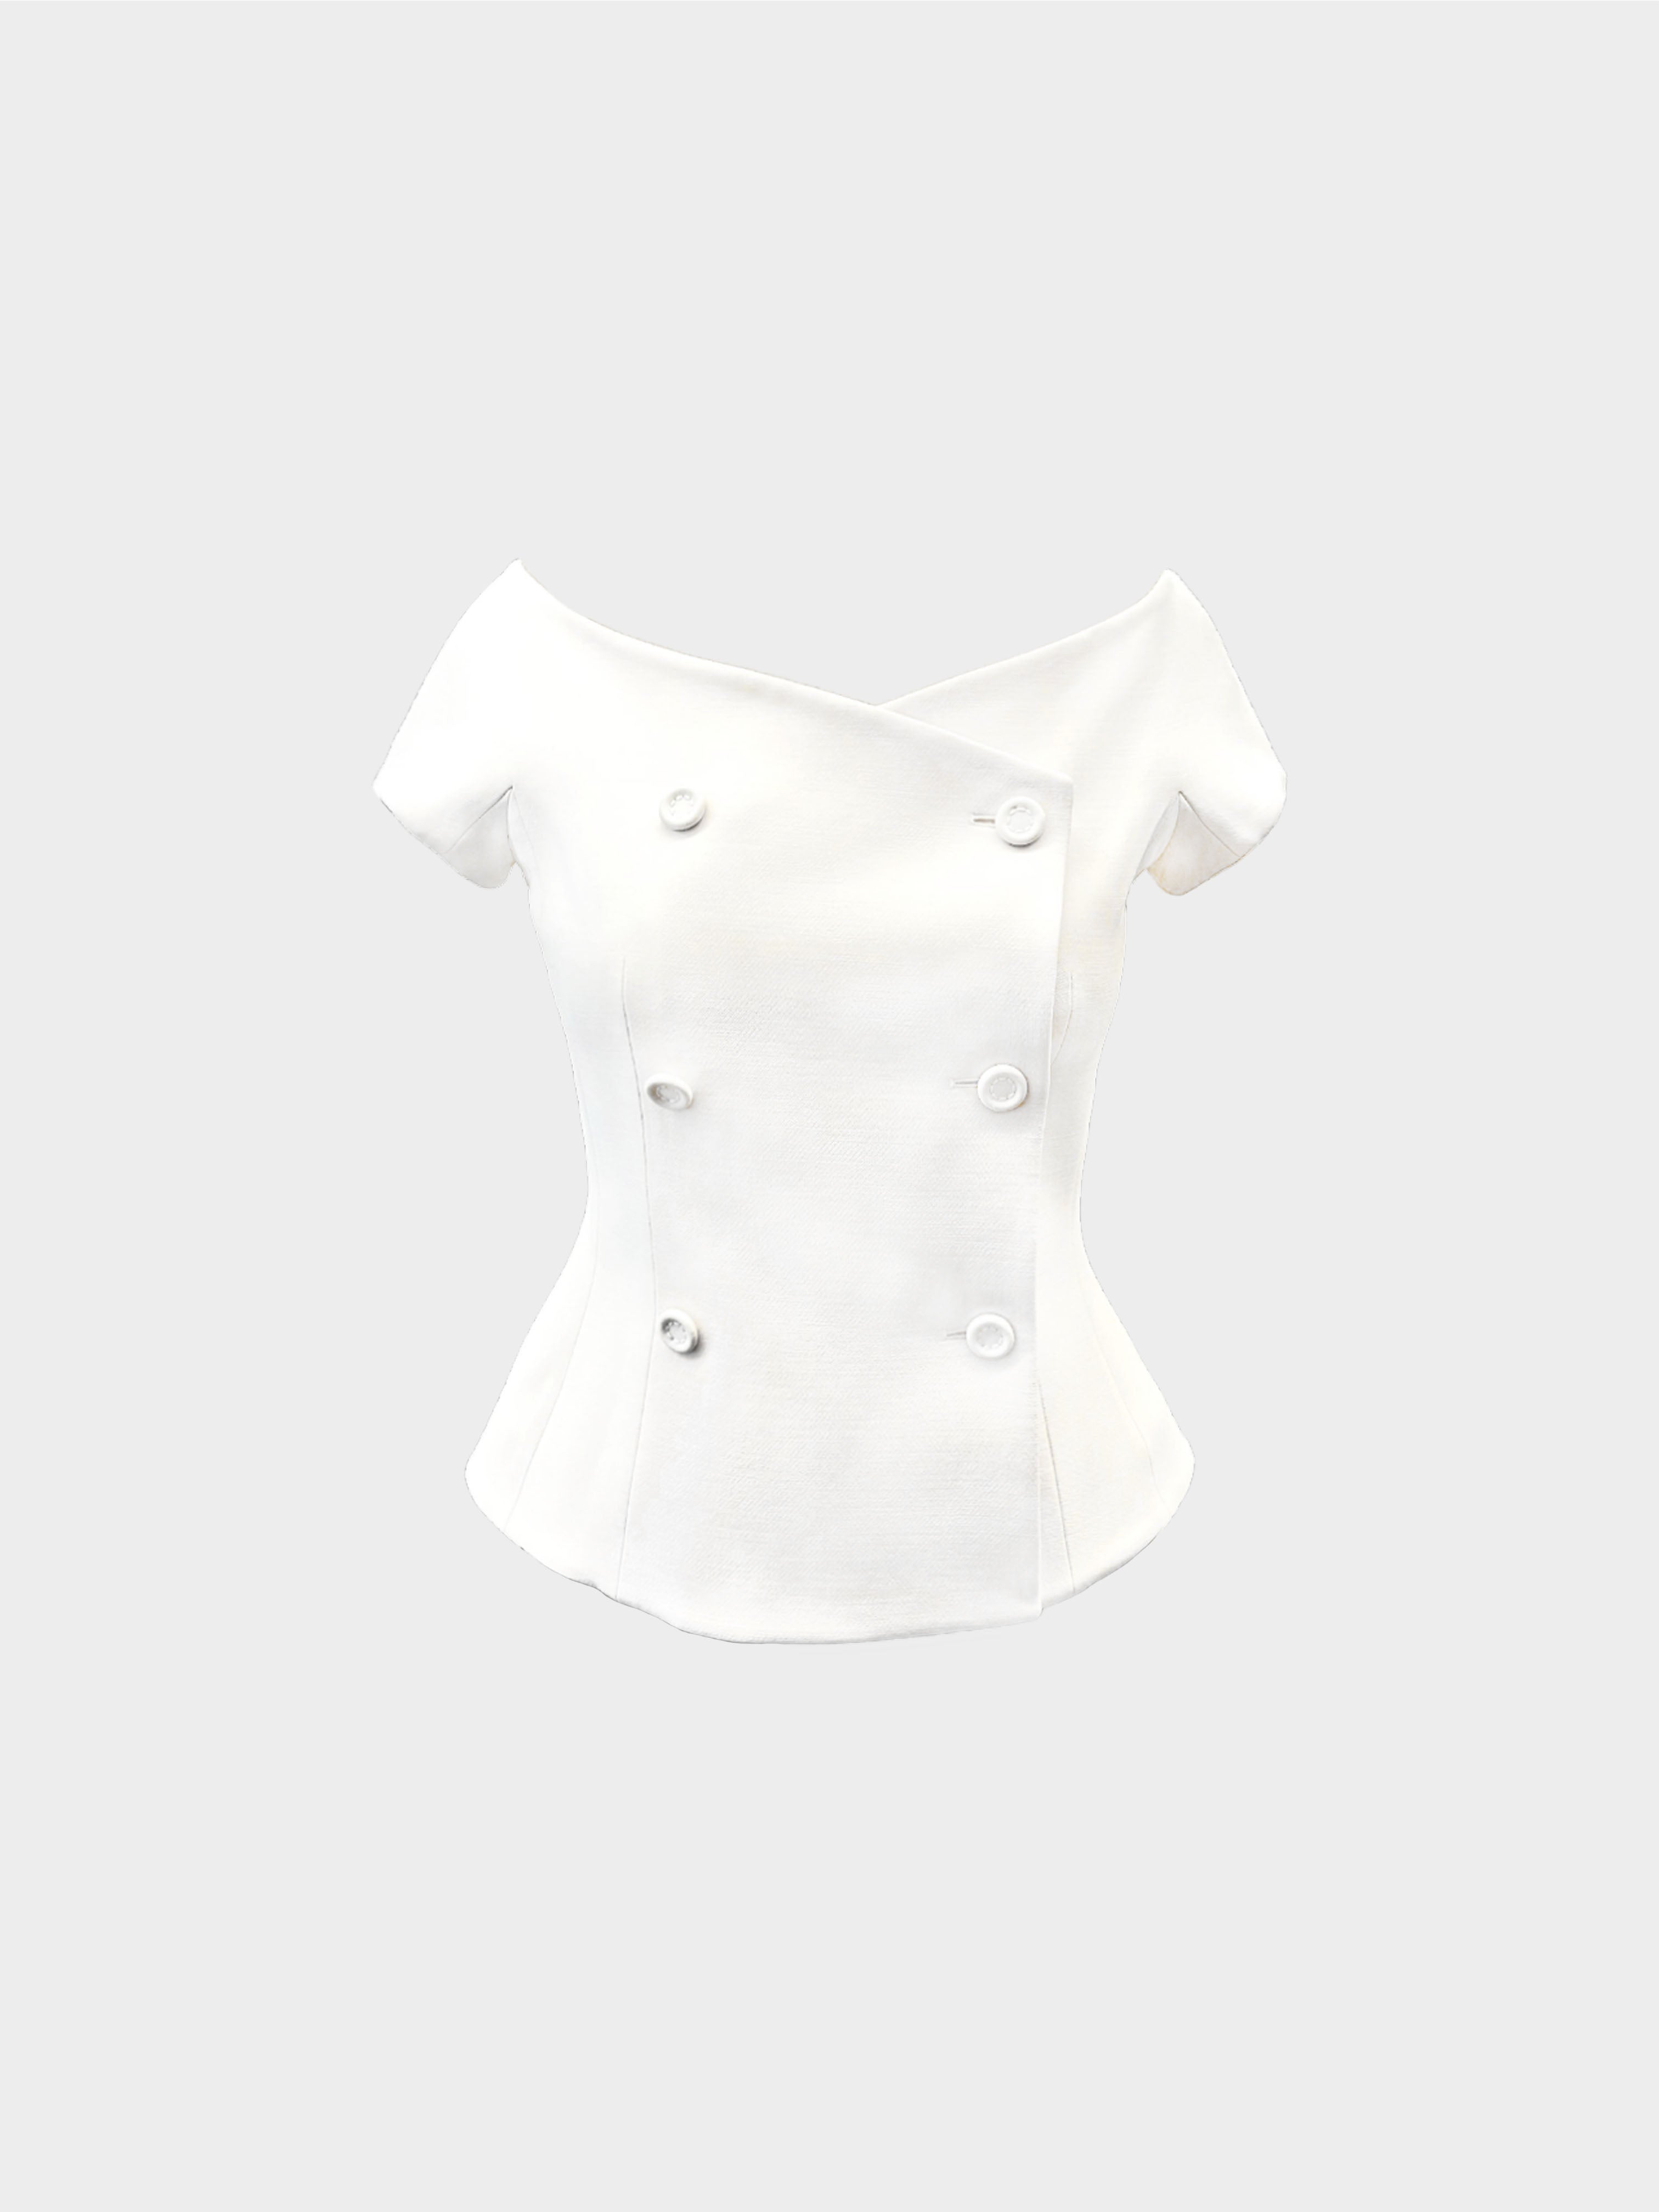 Christian Dior FW 2022 Cream Double Breasted Top